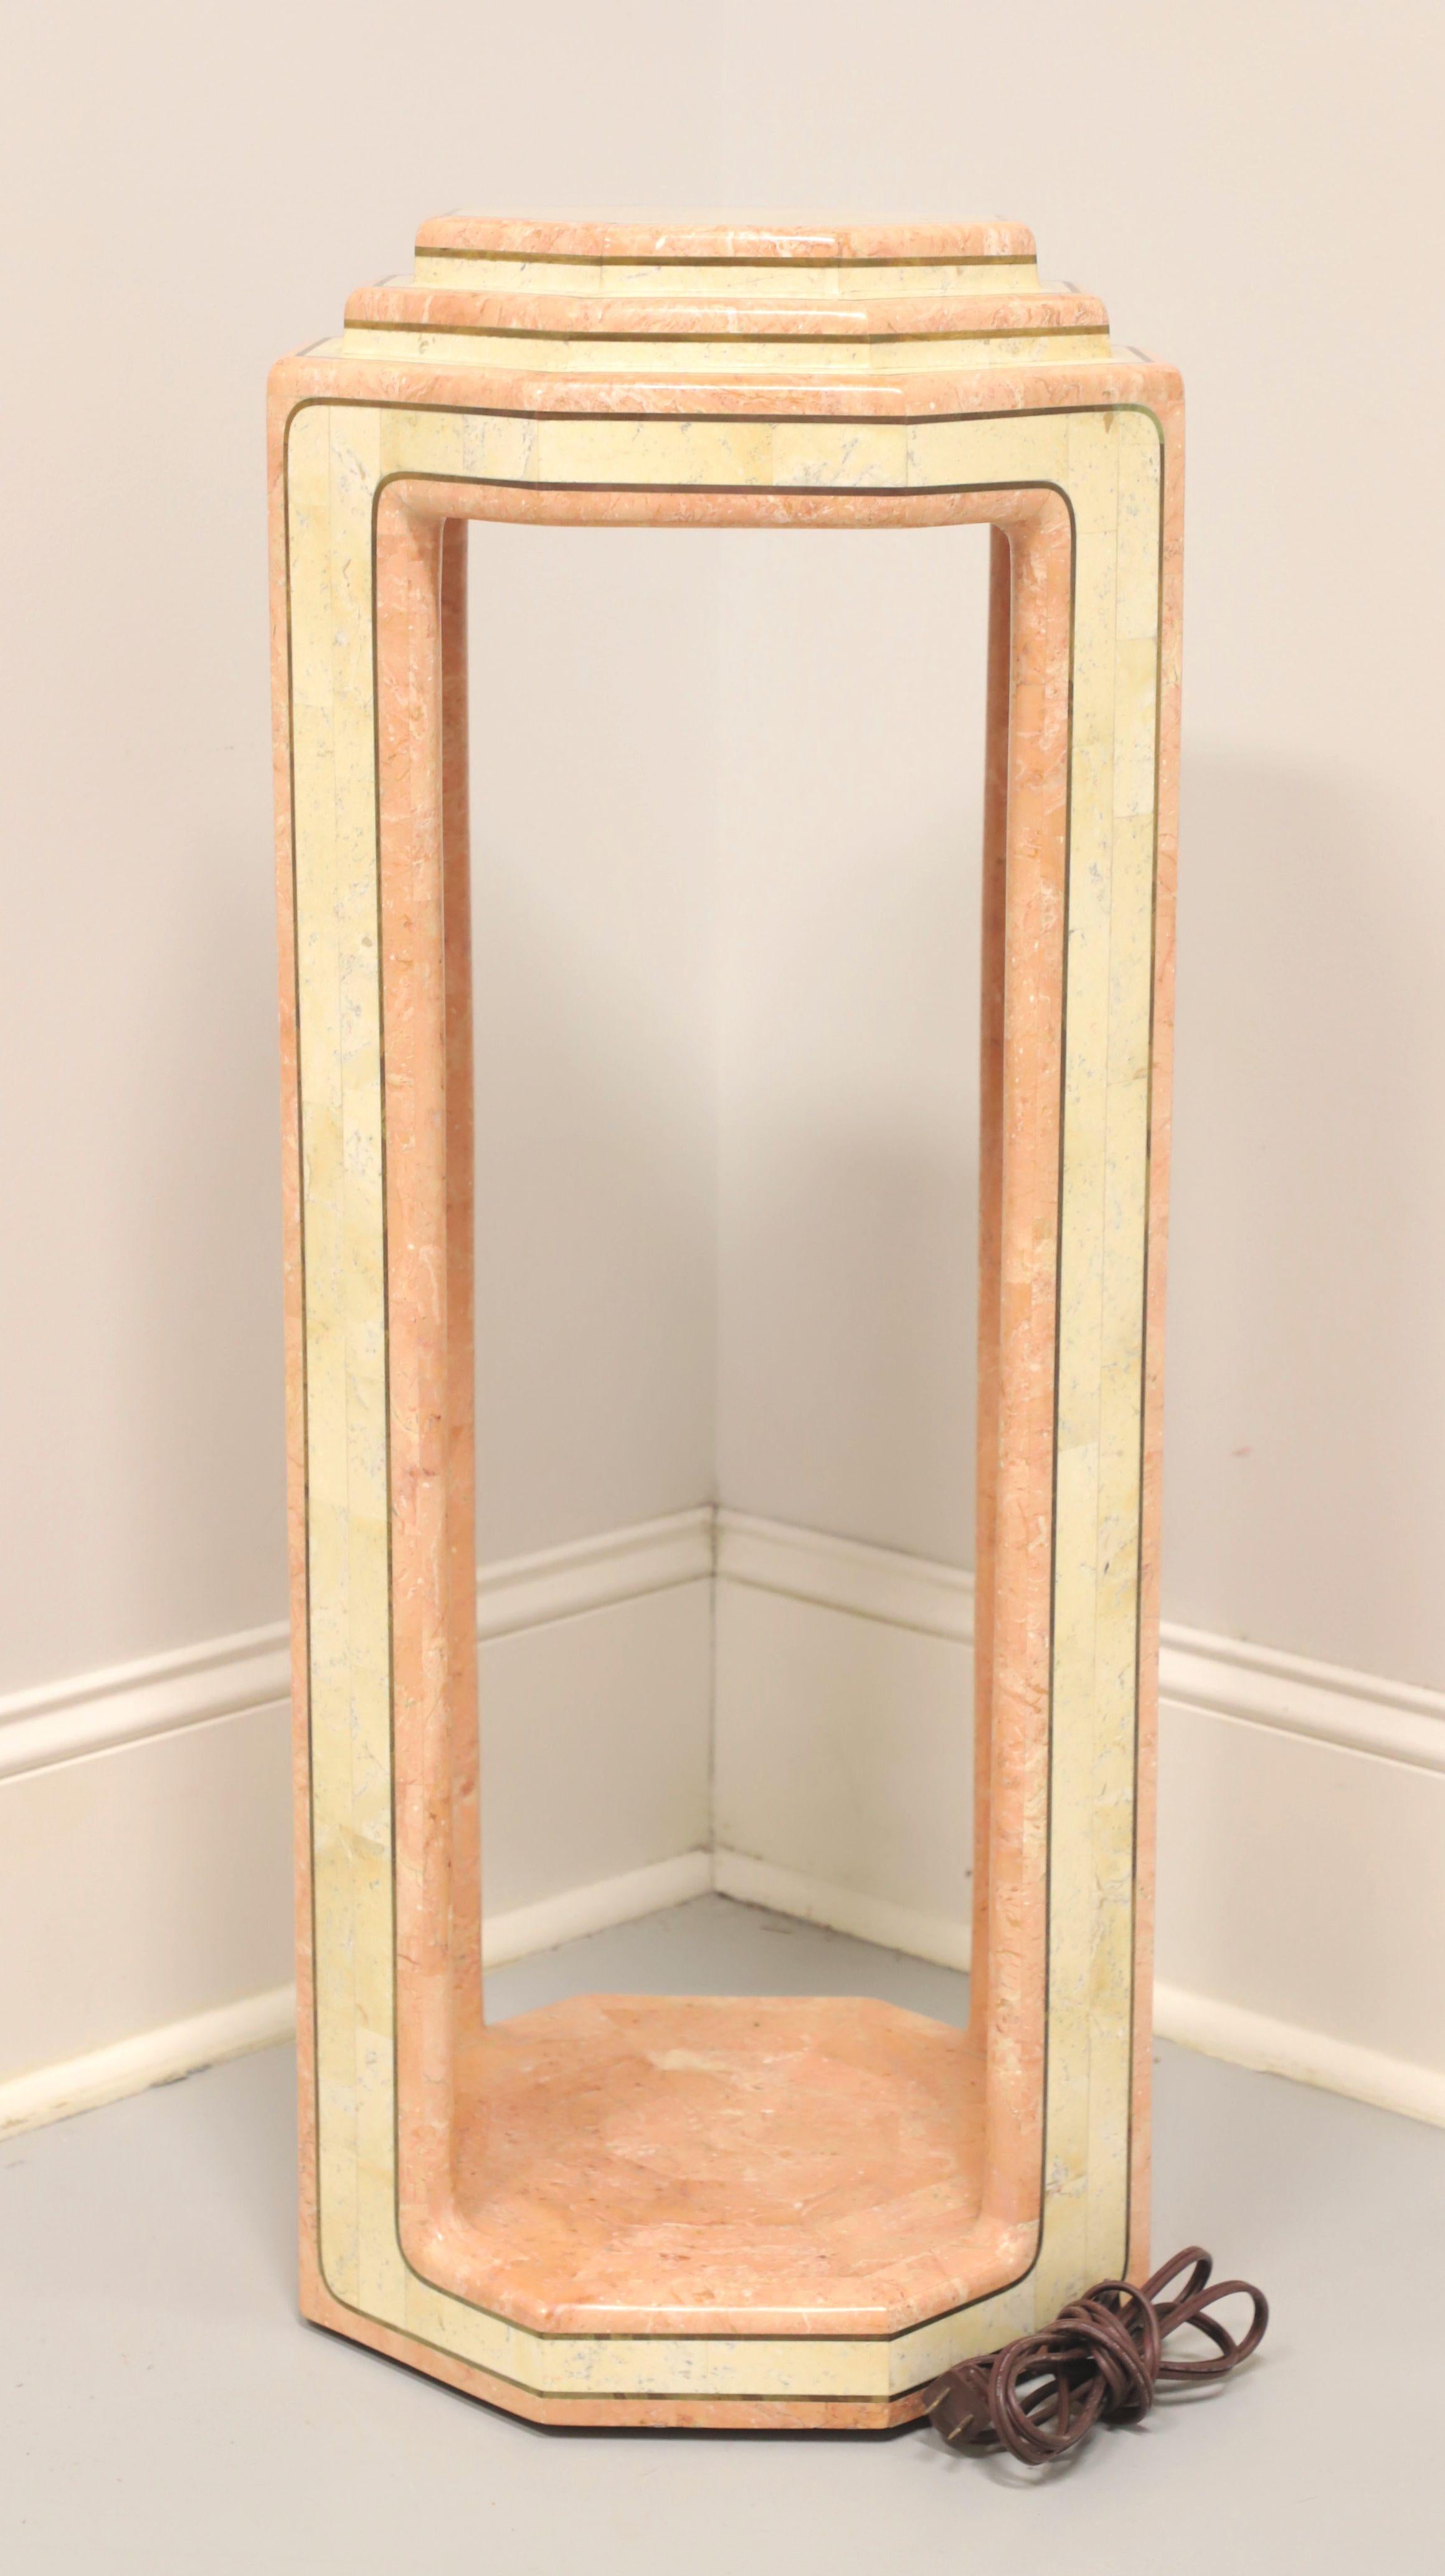 20th Century CASA BIQUE Pink & White Tessellated Marble Lighted Art Deco Display Column For Sale